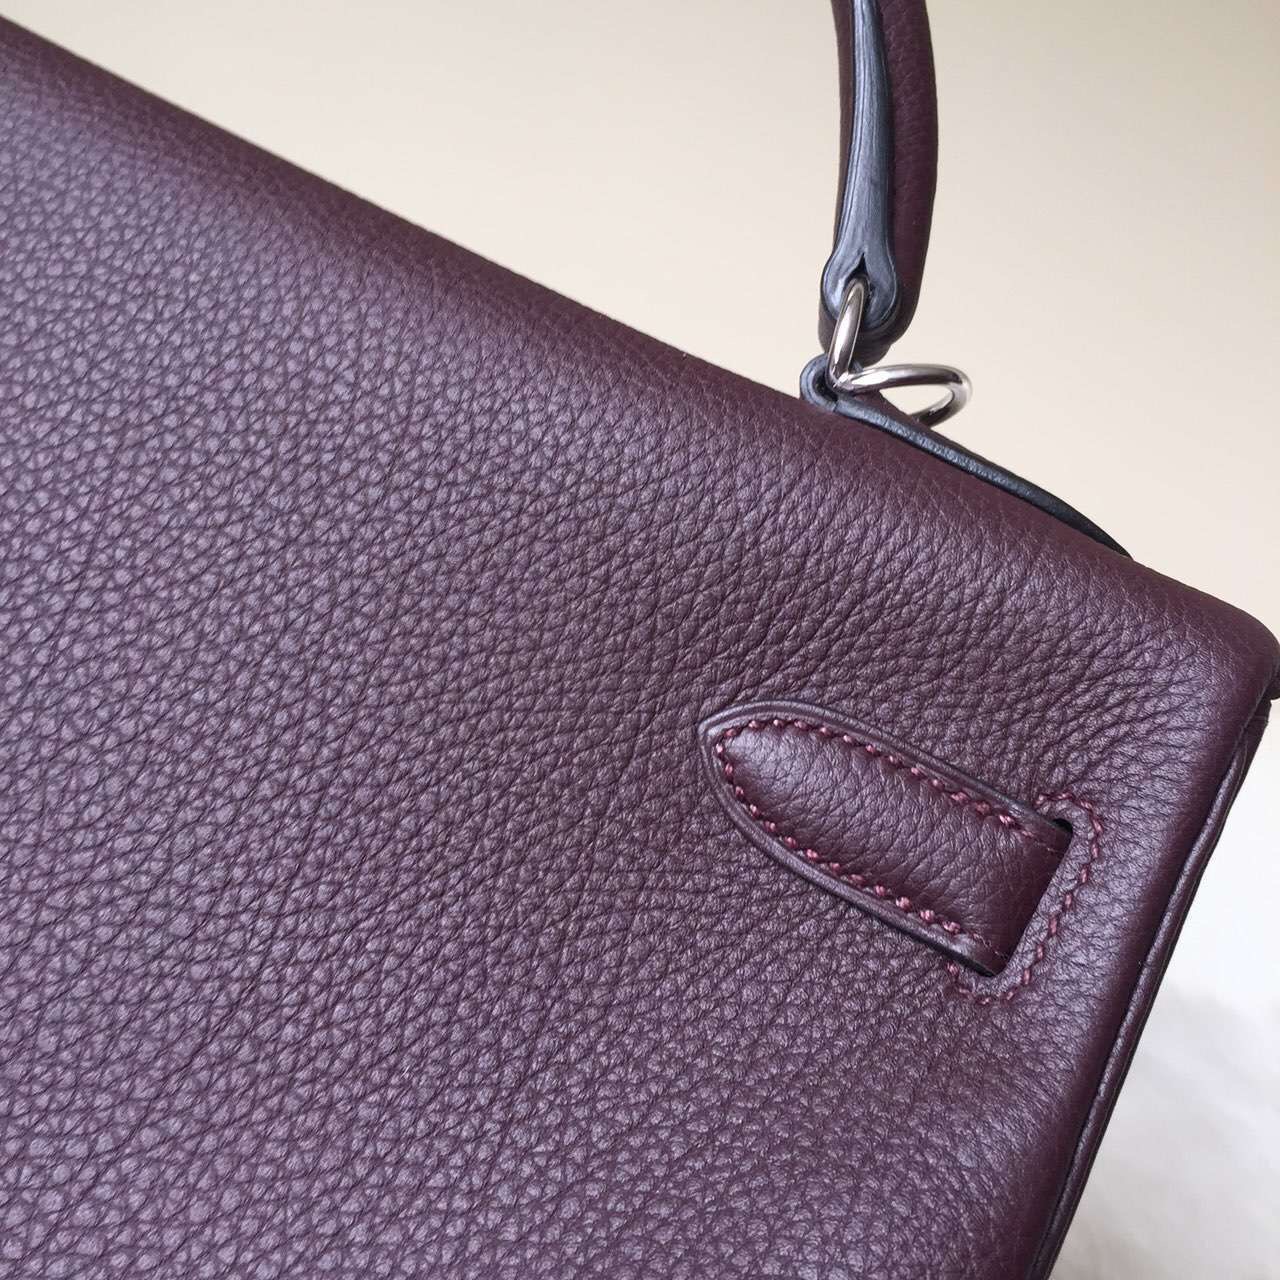 Hand Stitching Hermes Togo Leather Kelly Bag 32CM in Bordeaux